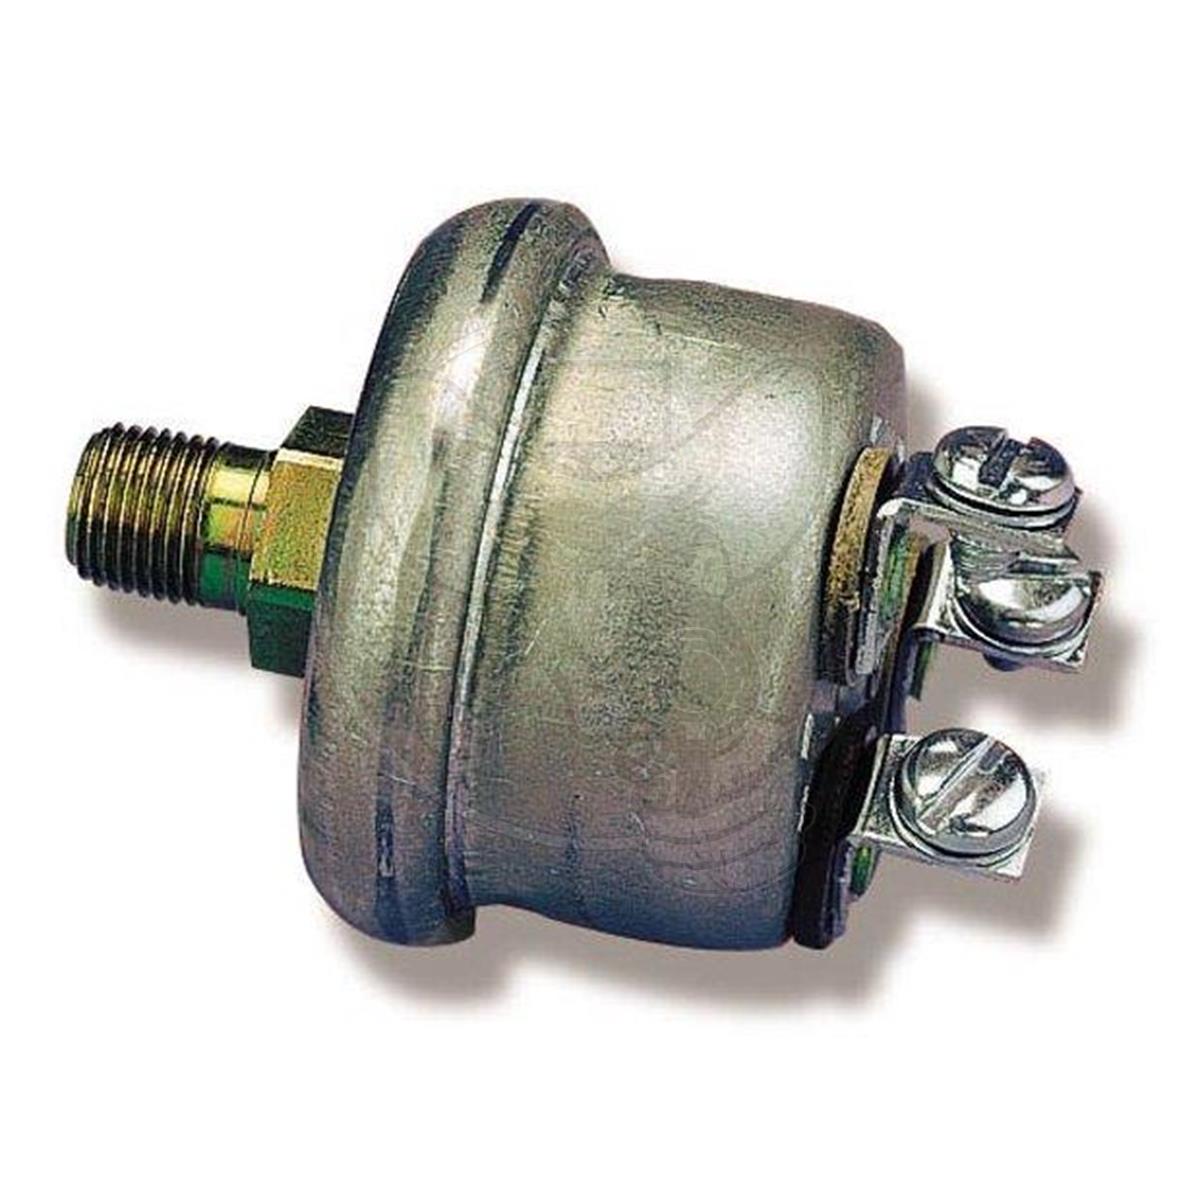 MARINE OIL PRESSURE SWITCH FUEL PUMP SAFETY FOR ROTARY ELECTRIC FUEL PUMP